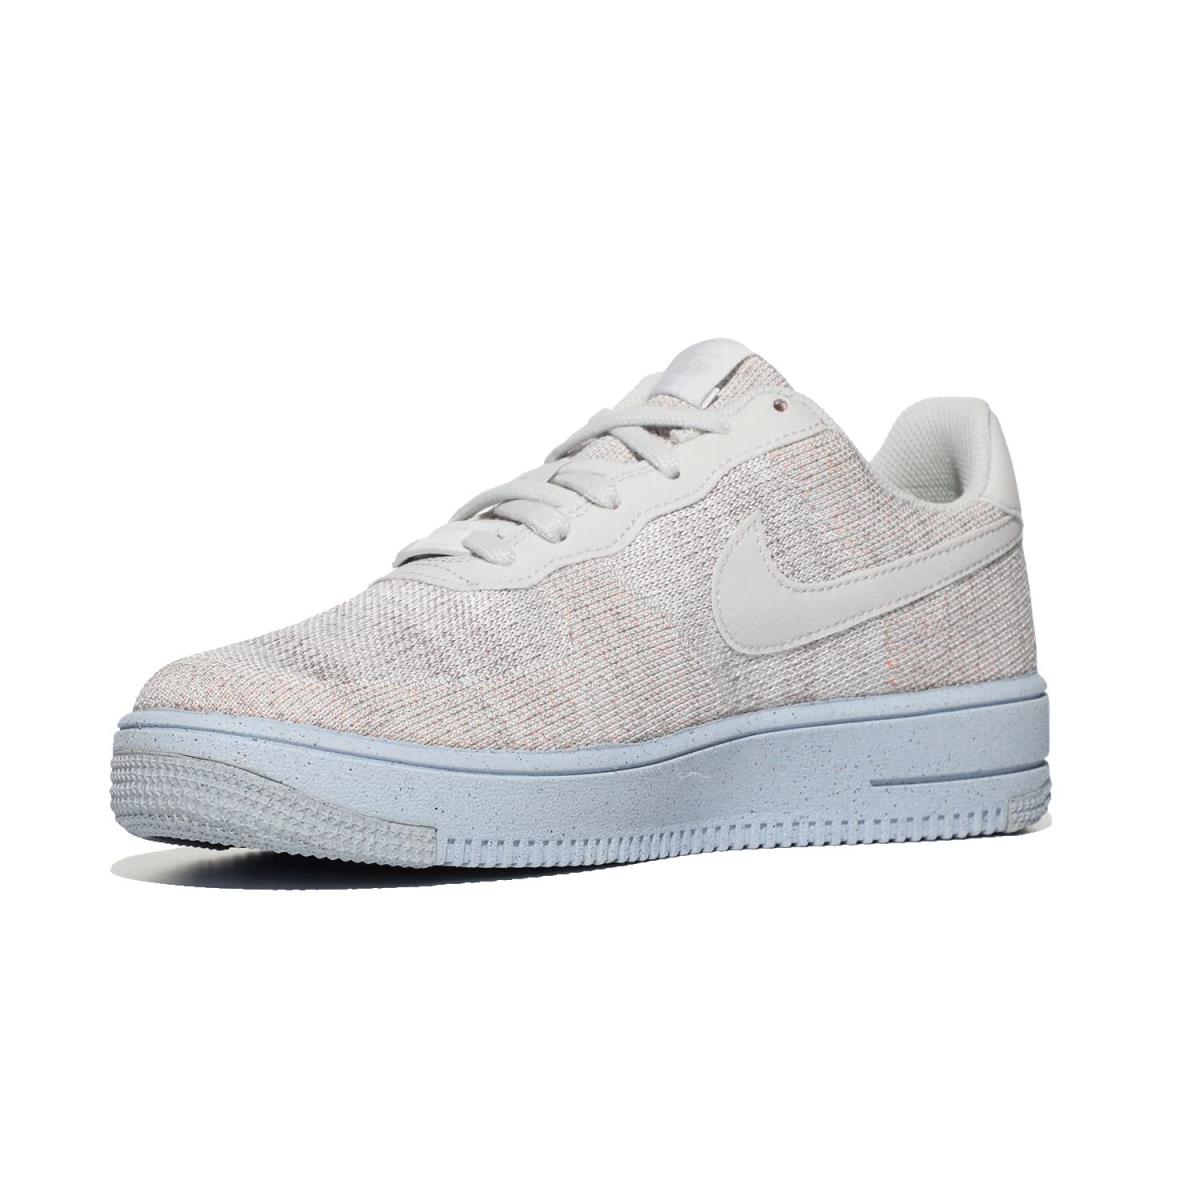 Boy`s Shoes Nike Kids Air Force 1 Crater Flyknit Big Kid White/Photon Dust/Chambray Blue/Volt